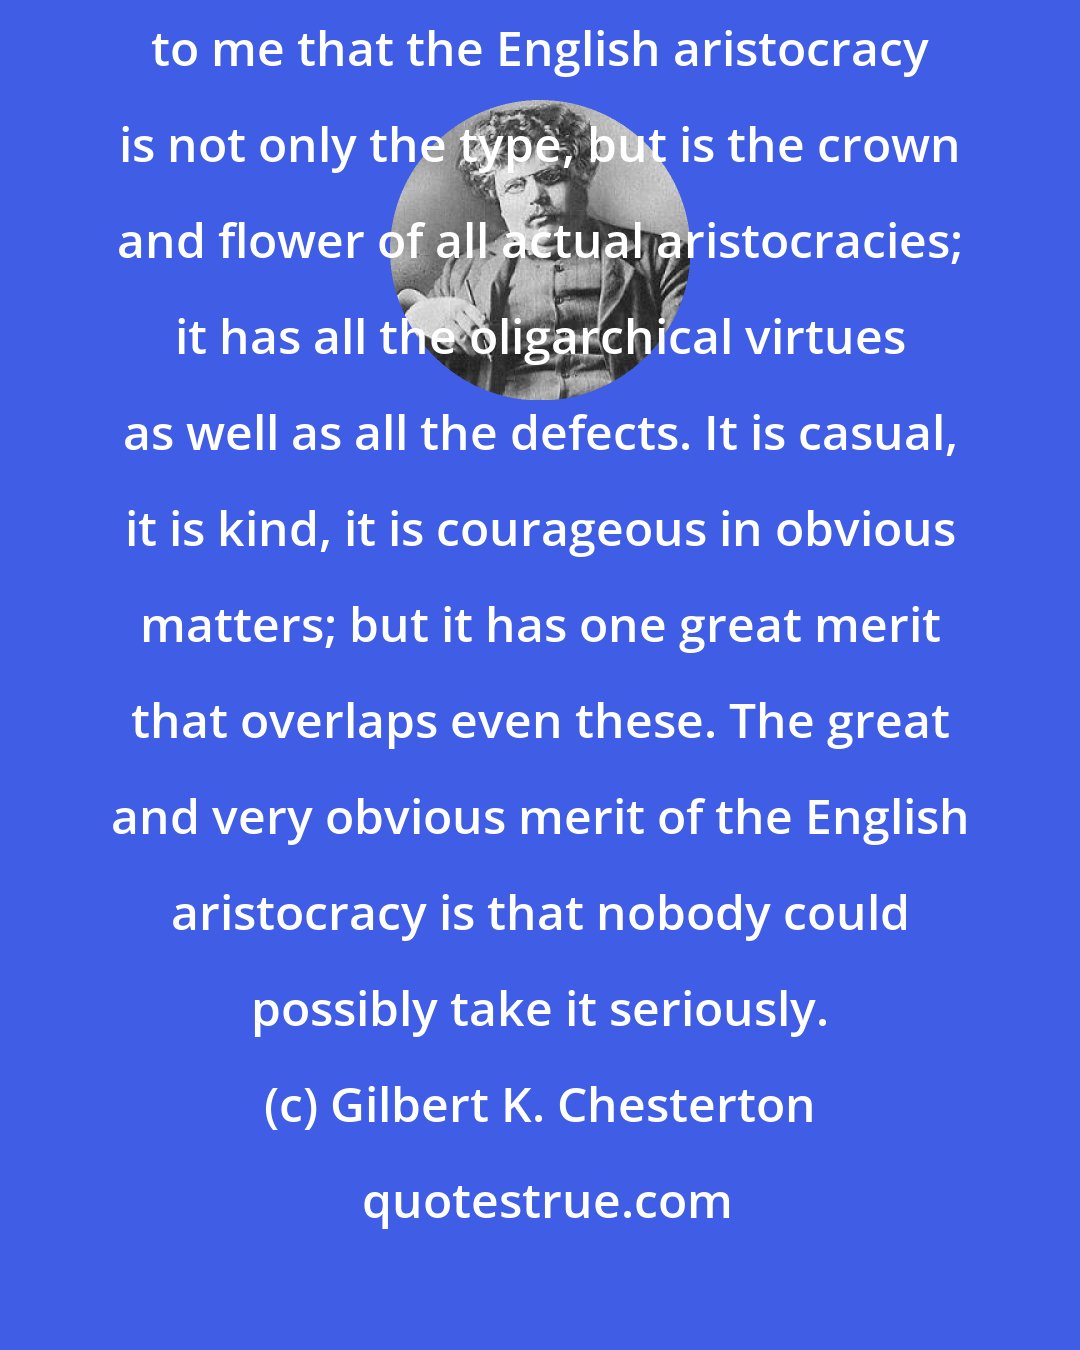 Gilbert K. Chesterton: It may be a mere patriotic bias, though I do not think so, but it seems to me that the English aristocracy is not only the type, but is the crown and flower of all actual aristocracies; it has all the oligarchical virtues as well as all the defects. It is casual, it is kind, it is courageous in obvious matters; but it has one great merit that overlaps even these. The great and very obvious merit of the English aristocracy is that nobody could possibly take it seriously.